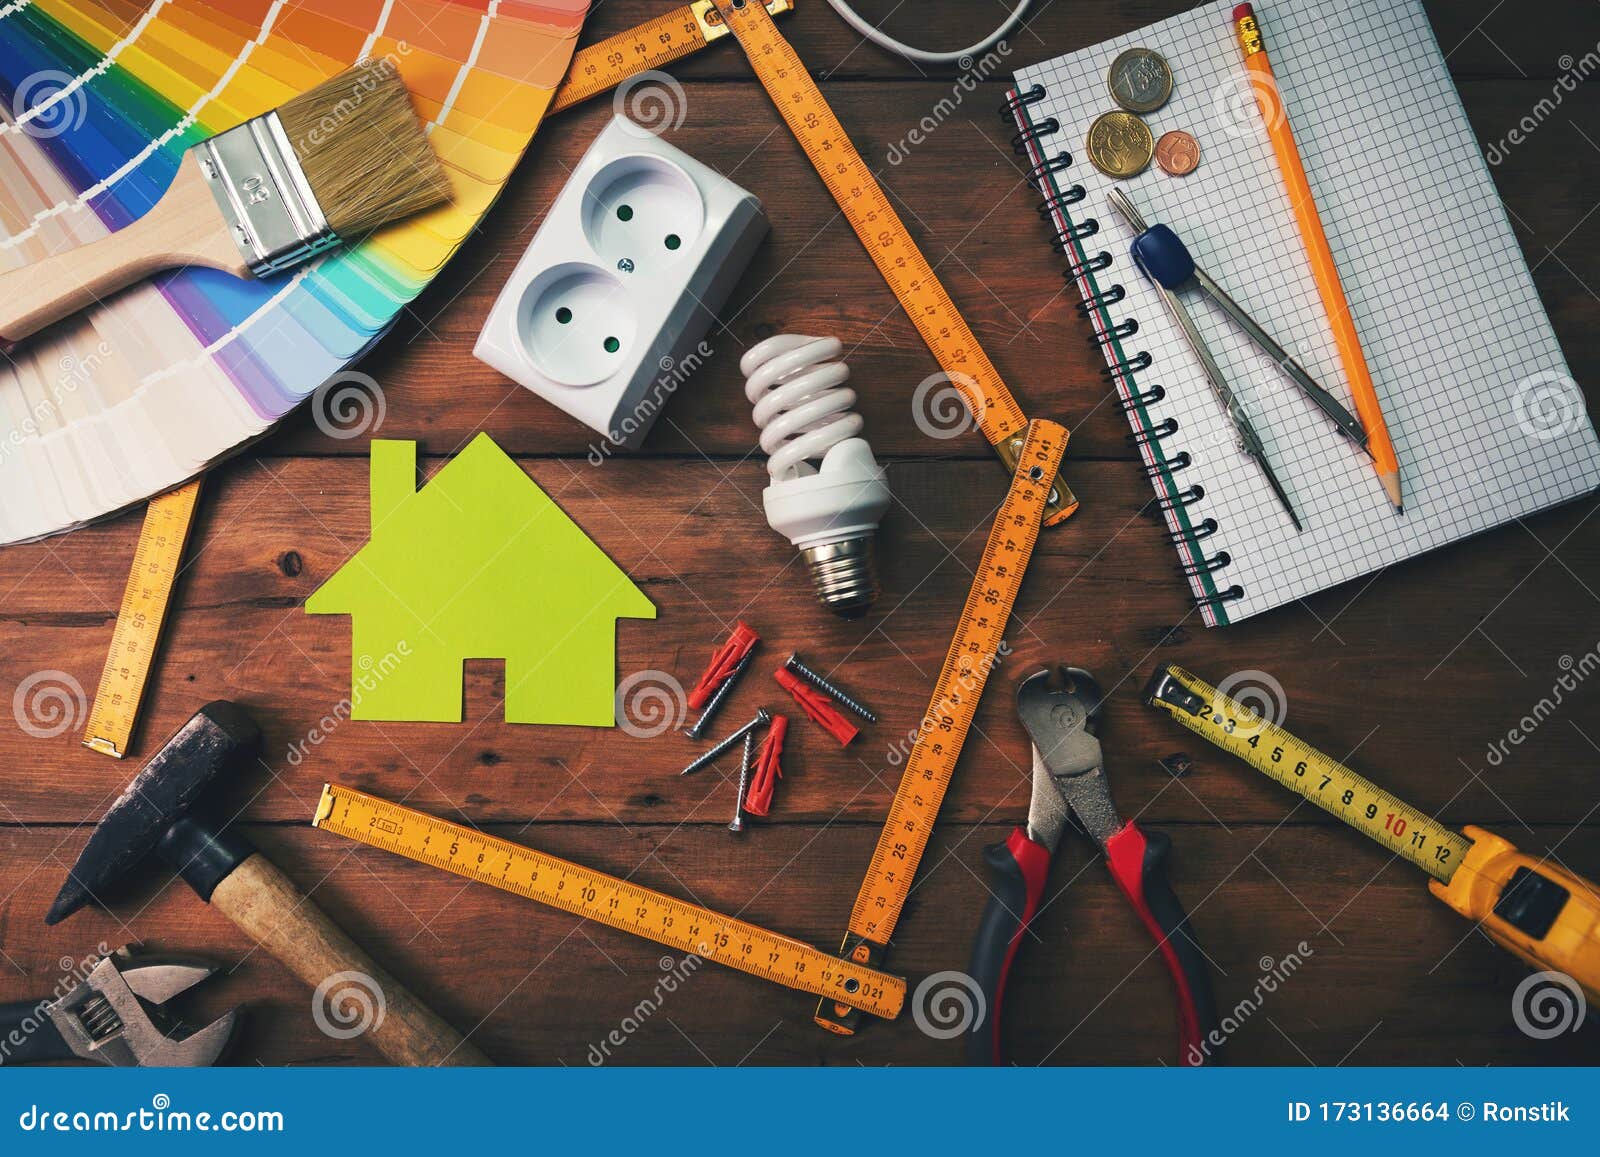 home improvement and repair concept - work tools and objects on wooden table